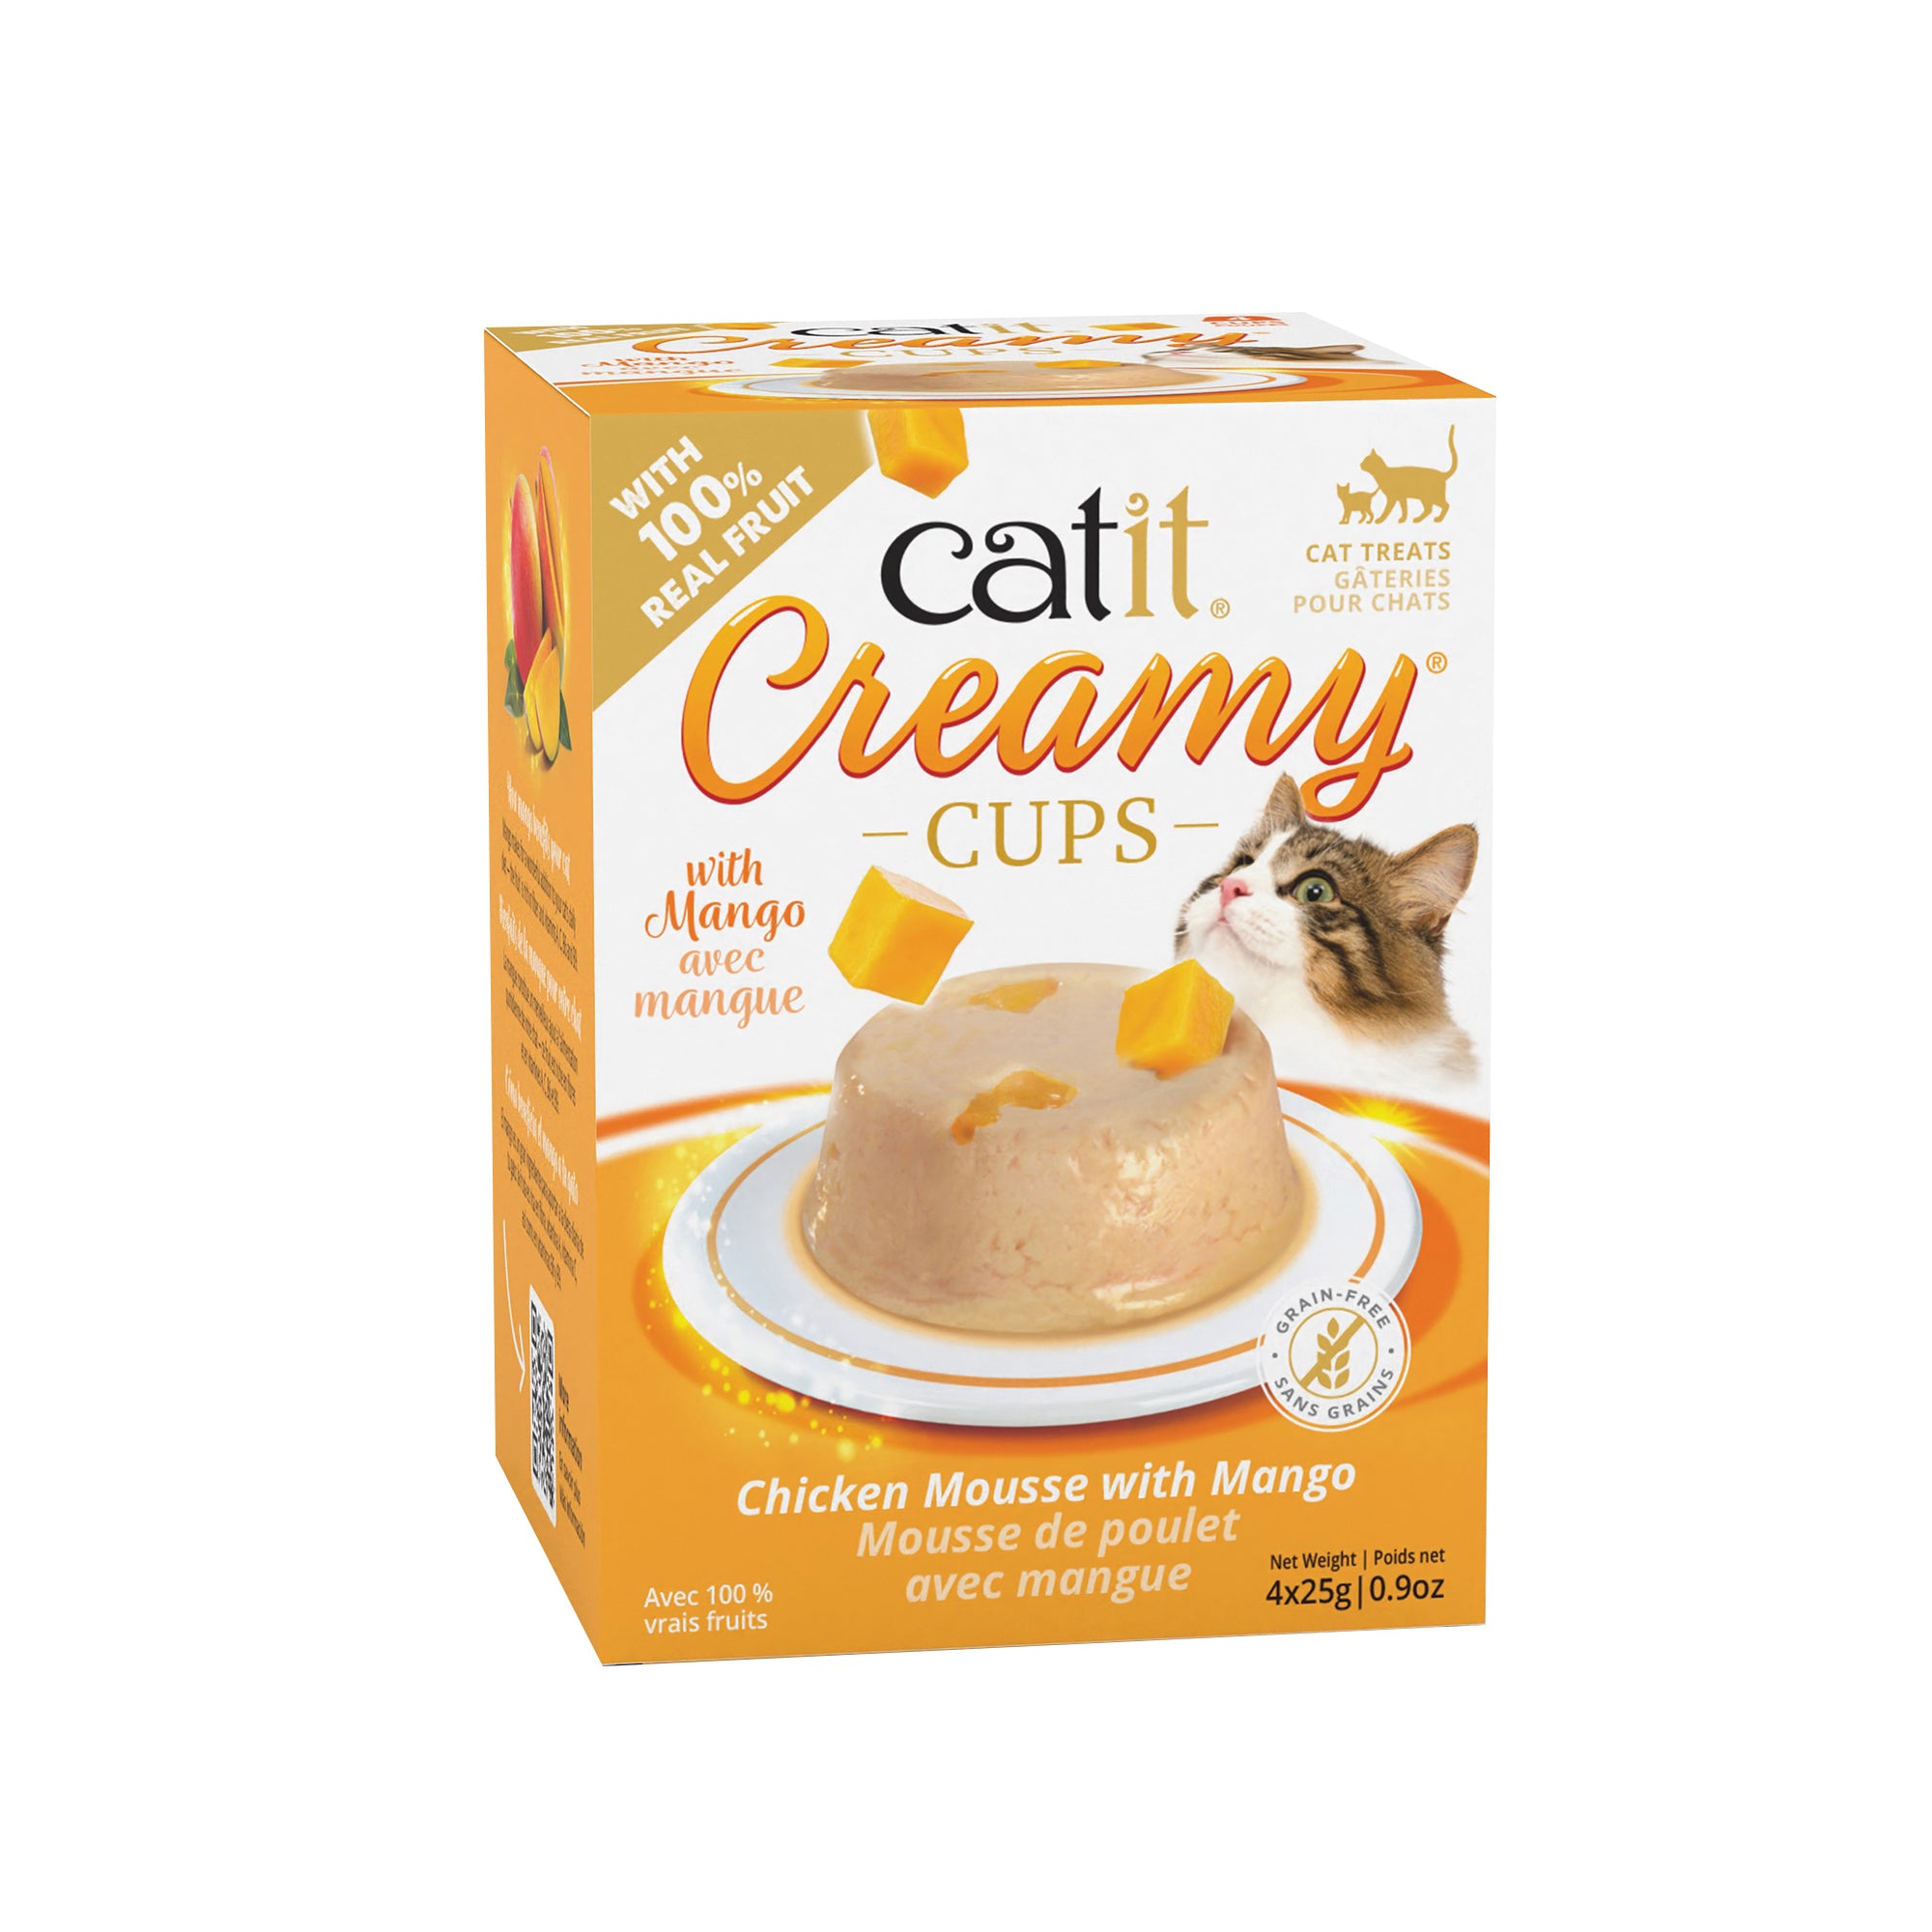 Catit Creamy Cups - Chicken Mousse with Mango - 4 x 25g